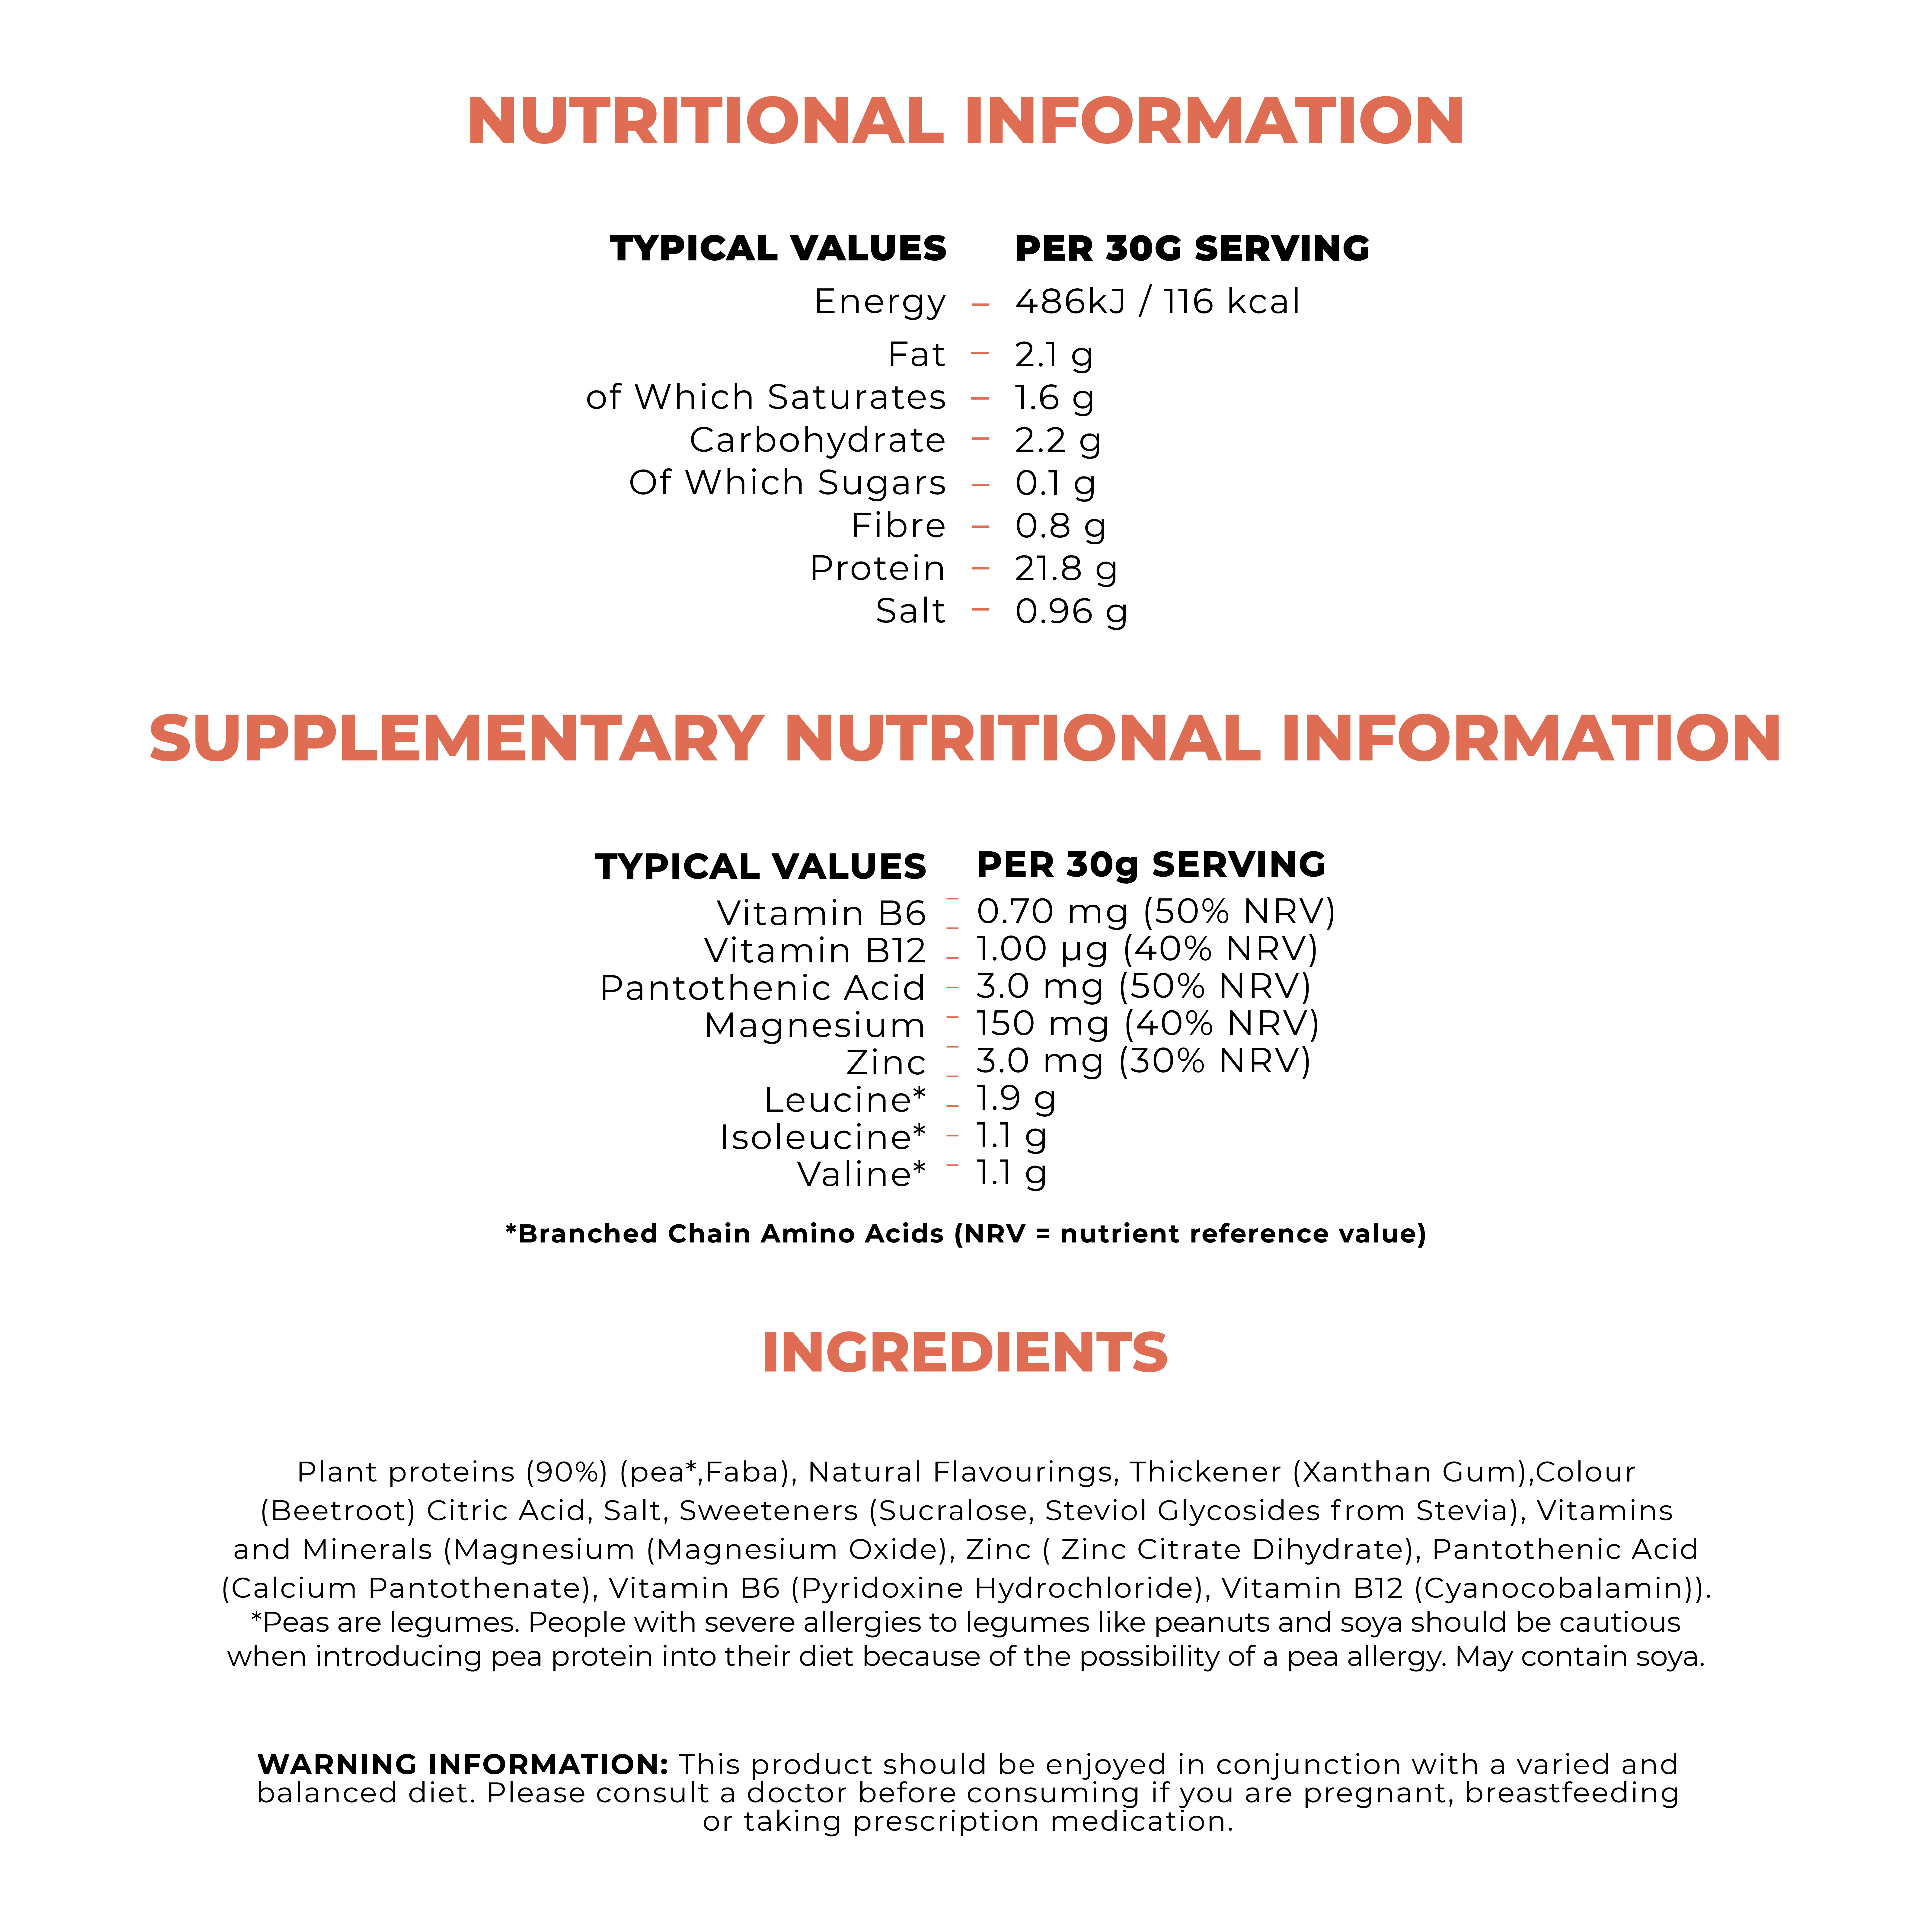 NUTRITIONAL INFORMATION TYPICAL VALUES PER 30G SERVING Energy 486kJ / 116 kcal Fat 2.1 g Of Which Sugars 0.1 g Fibre 0.8 g Protein 21.8 g Salt 0.96 g of Which Saturates Carbohydrate SUPPLEMENTARY NUTRITIONAL INFORMATION TYPICAL VALUES PER 30g SERVING Vitamin B6 0.70 mg (50% NRV) Vitamin B12 - 1.00 µg (40% NRV) Pantothenic Acid - 3.0 mg (50% NRV) Magnesium 150 mg (40% NRV) Zinc
                                  Leucine 3.0 mg (30% NRV) 1.9 g Isoleucine 1.1 g Valine 1.1 g Branched Chain Amino Acids (NRV = nutrient reference value INGREDIENTS 
                                  Plant proteins (90%) (pea, Faba), Natural Flavourings, Thickener (Xanthan Gum), Colour (Beetroot) Citric Acid, Salt, Sweeteners (Sucralose, Steviol Glycosides from Stevia), Vitamins and Minerals (Magnesium (Magnesium Oxide), Zinc (Zinc Citrate Dihydrate), Pantothenic Acid (Calcium Pantothenate), Vitamin B6 (Pyridoxine Hydrochloride), Vitamin B12 (Cyanocobalamin)). Peas are legumes. People with severe allergies to legumes like peanuts and soya should be cautious when introducing pea protein into their diet because of the possibility of a pea allergy. May contain soya. WARNING INFORMATION: This product should be enjoyed in conjunction with a varied and balanced diet. Please consult a doctor before consuming if you are pregnant, breastfeeding or taking prescription medication. 